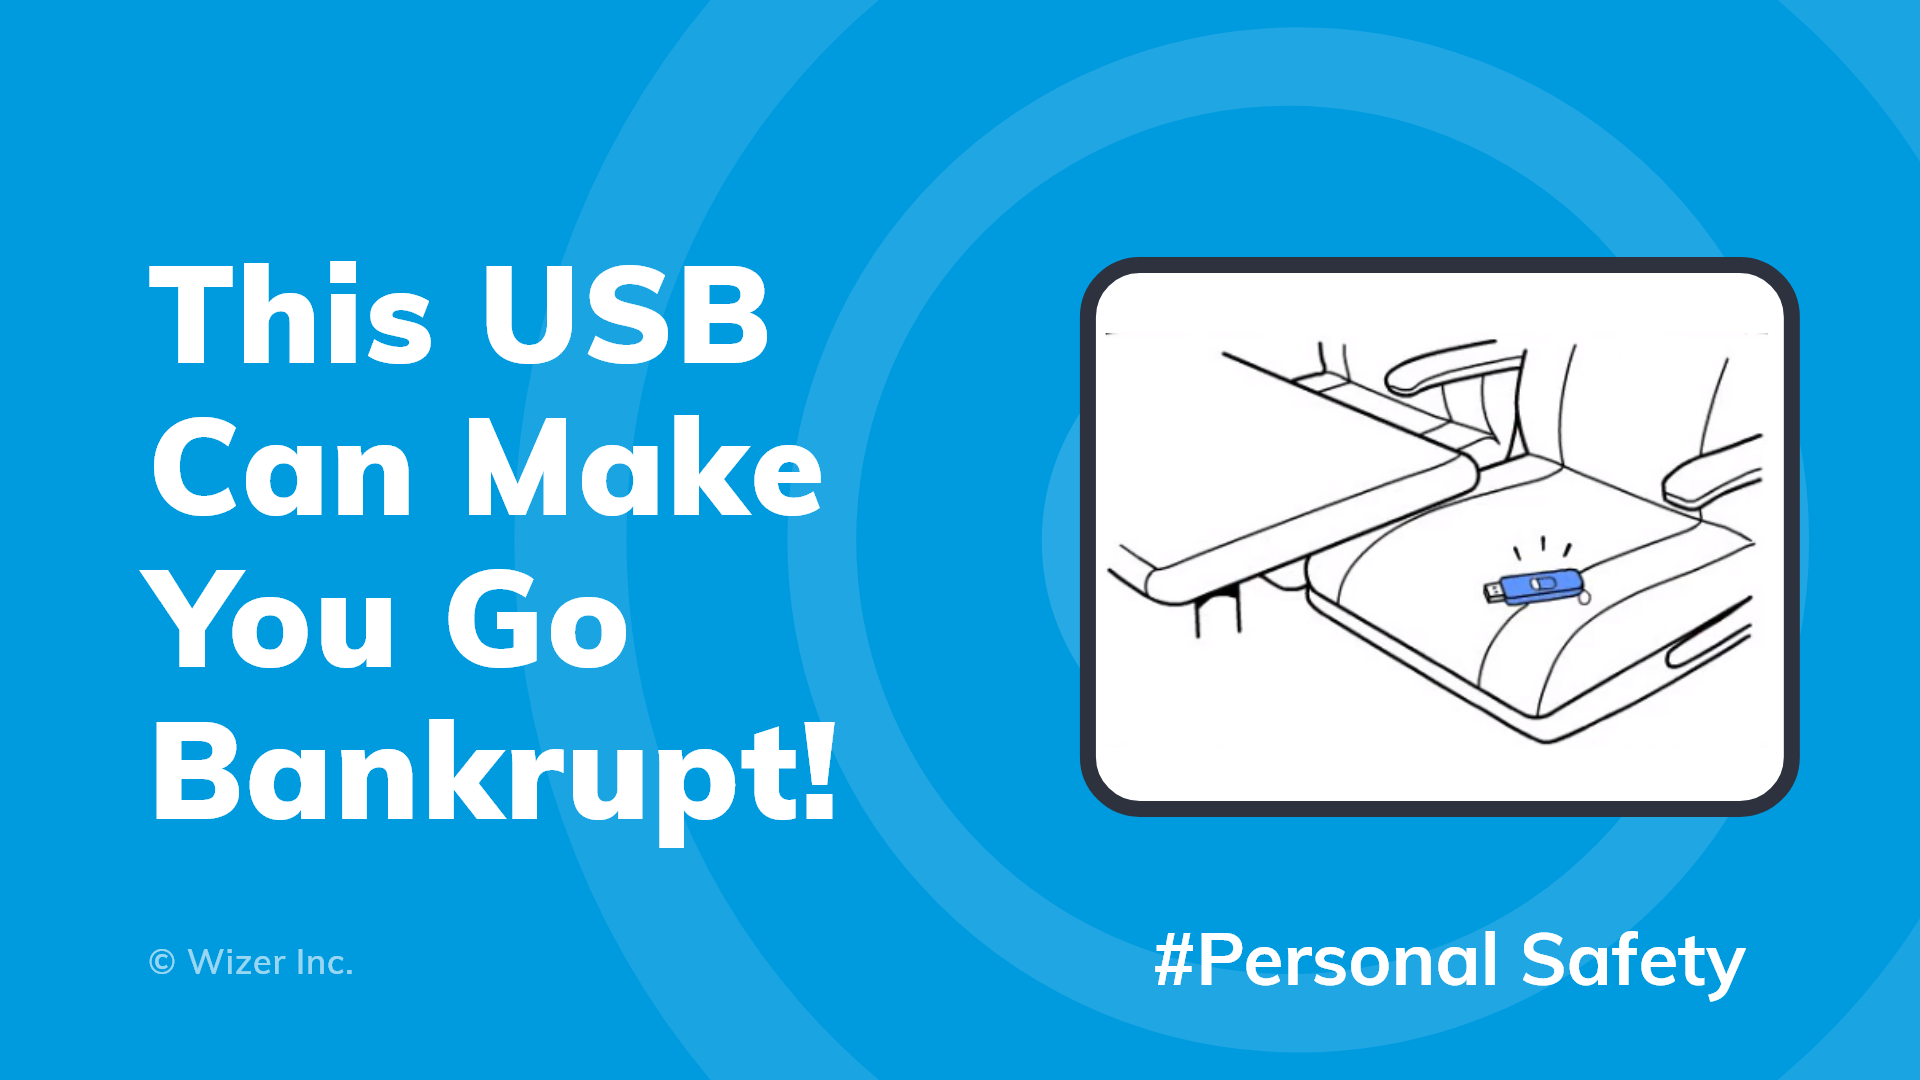 This USB Can Make You Go Bankrupt!